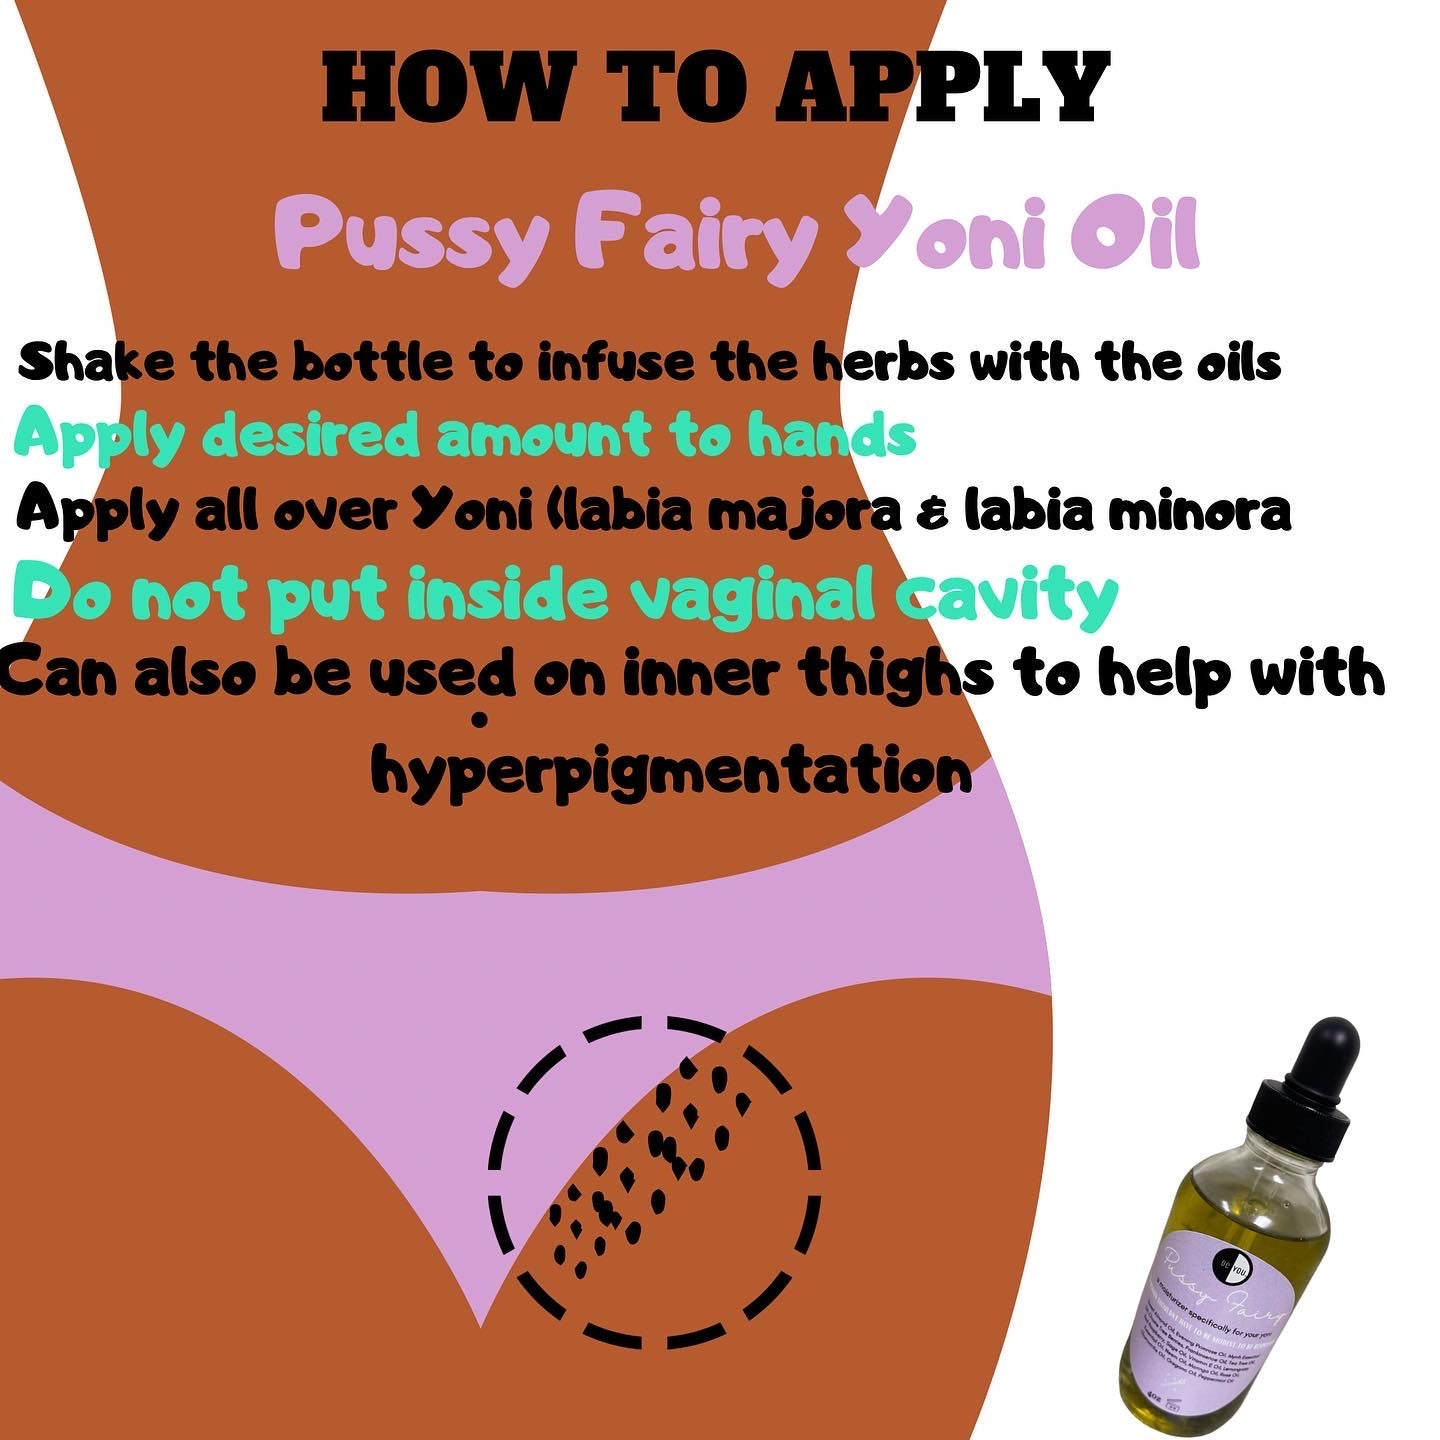 Pussy Fairy Yoni Oil